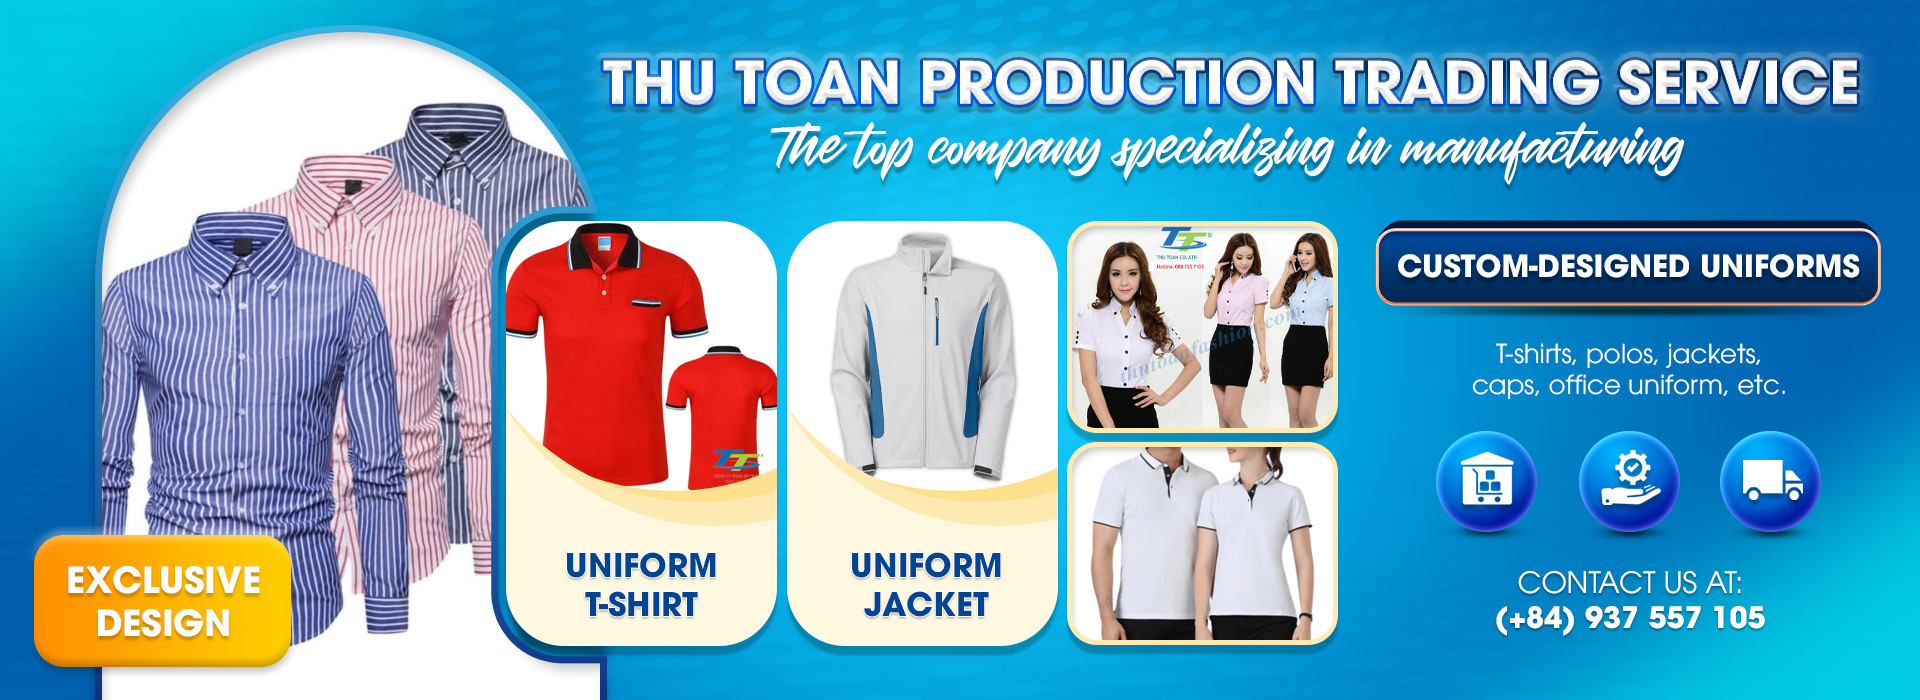 Thu Toan Production Trading Service Co., Ltd.